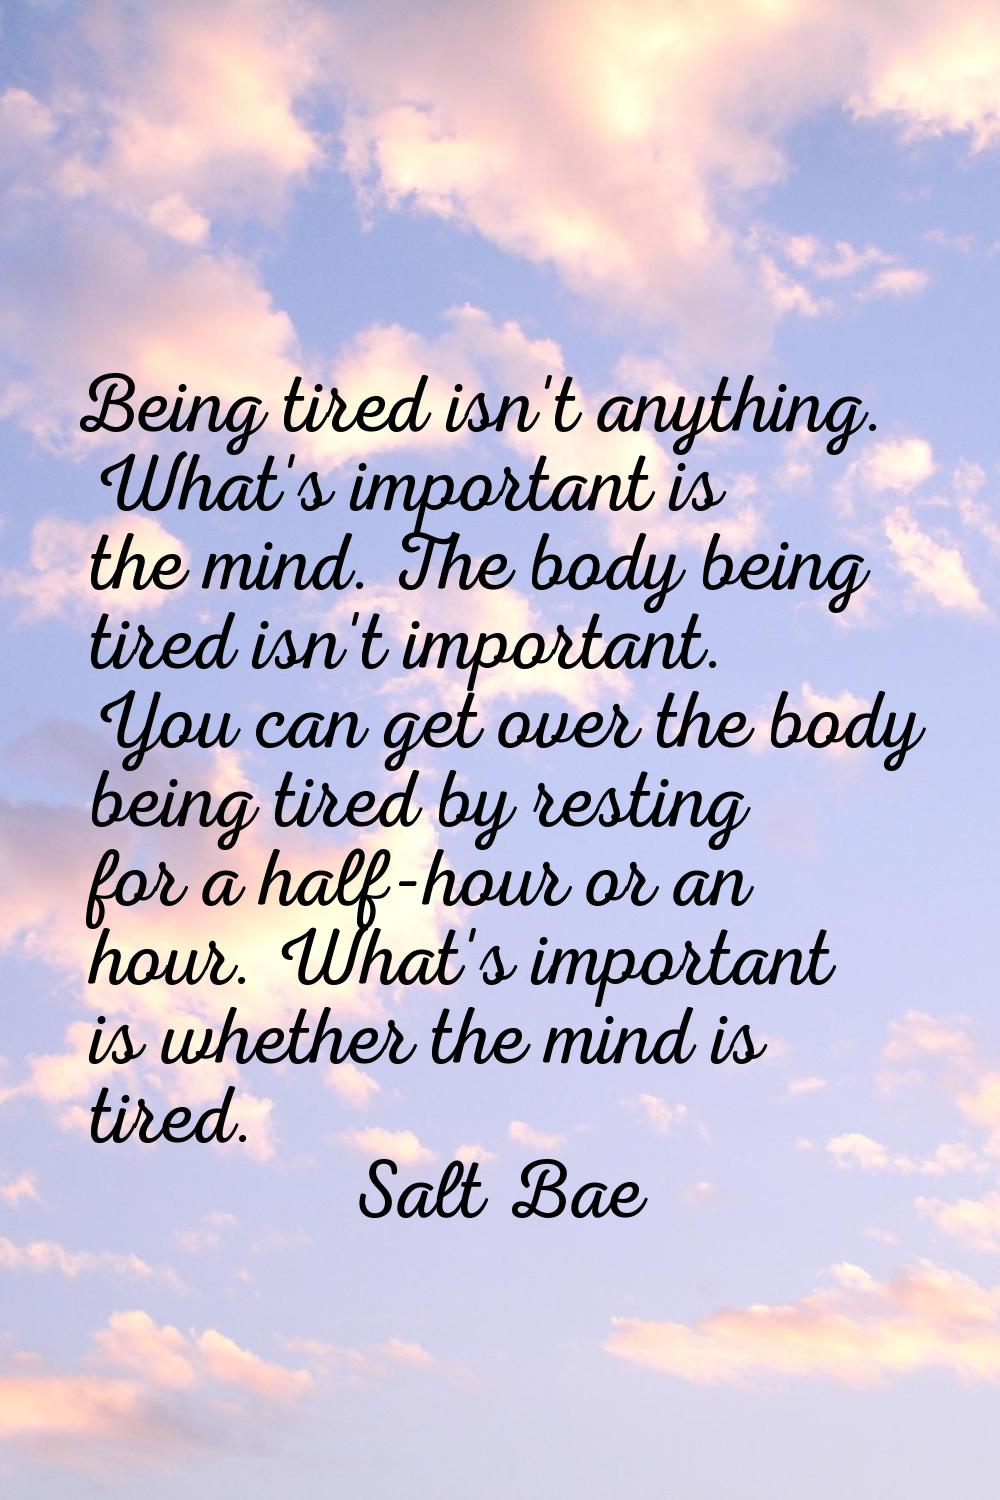 Being tired isn't anything. What's important is the mind. The body being tired isn't important. You